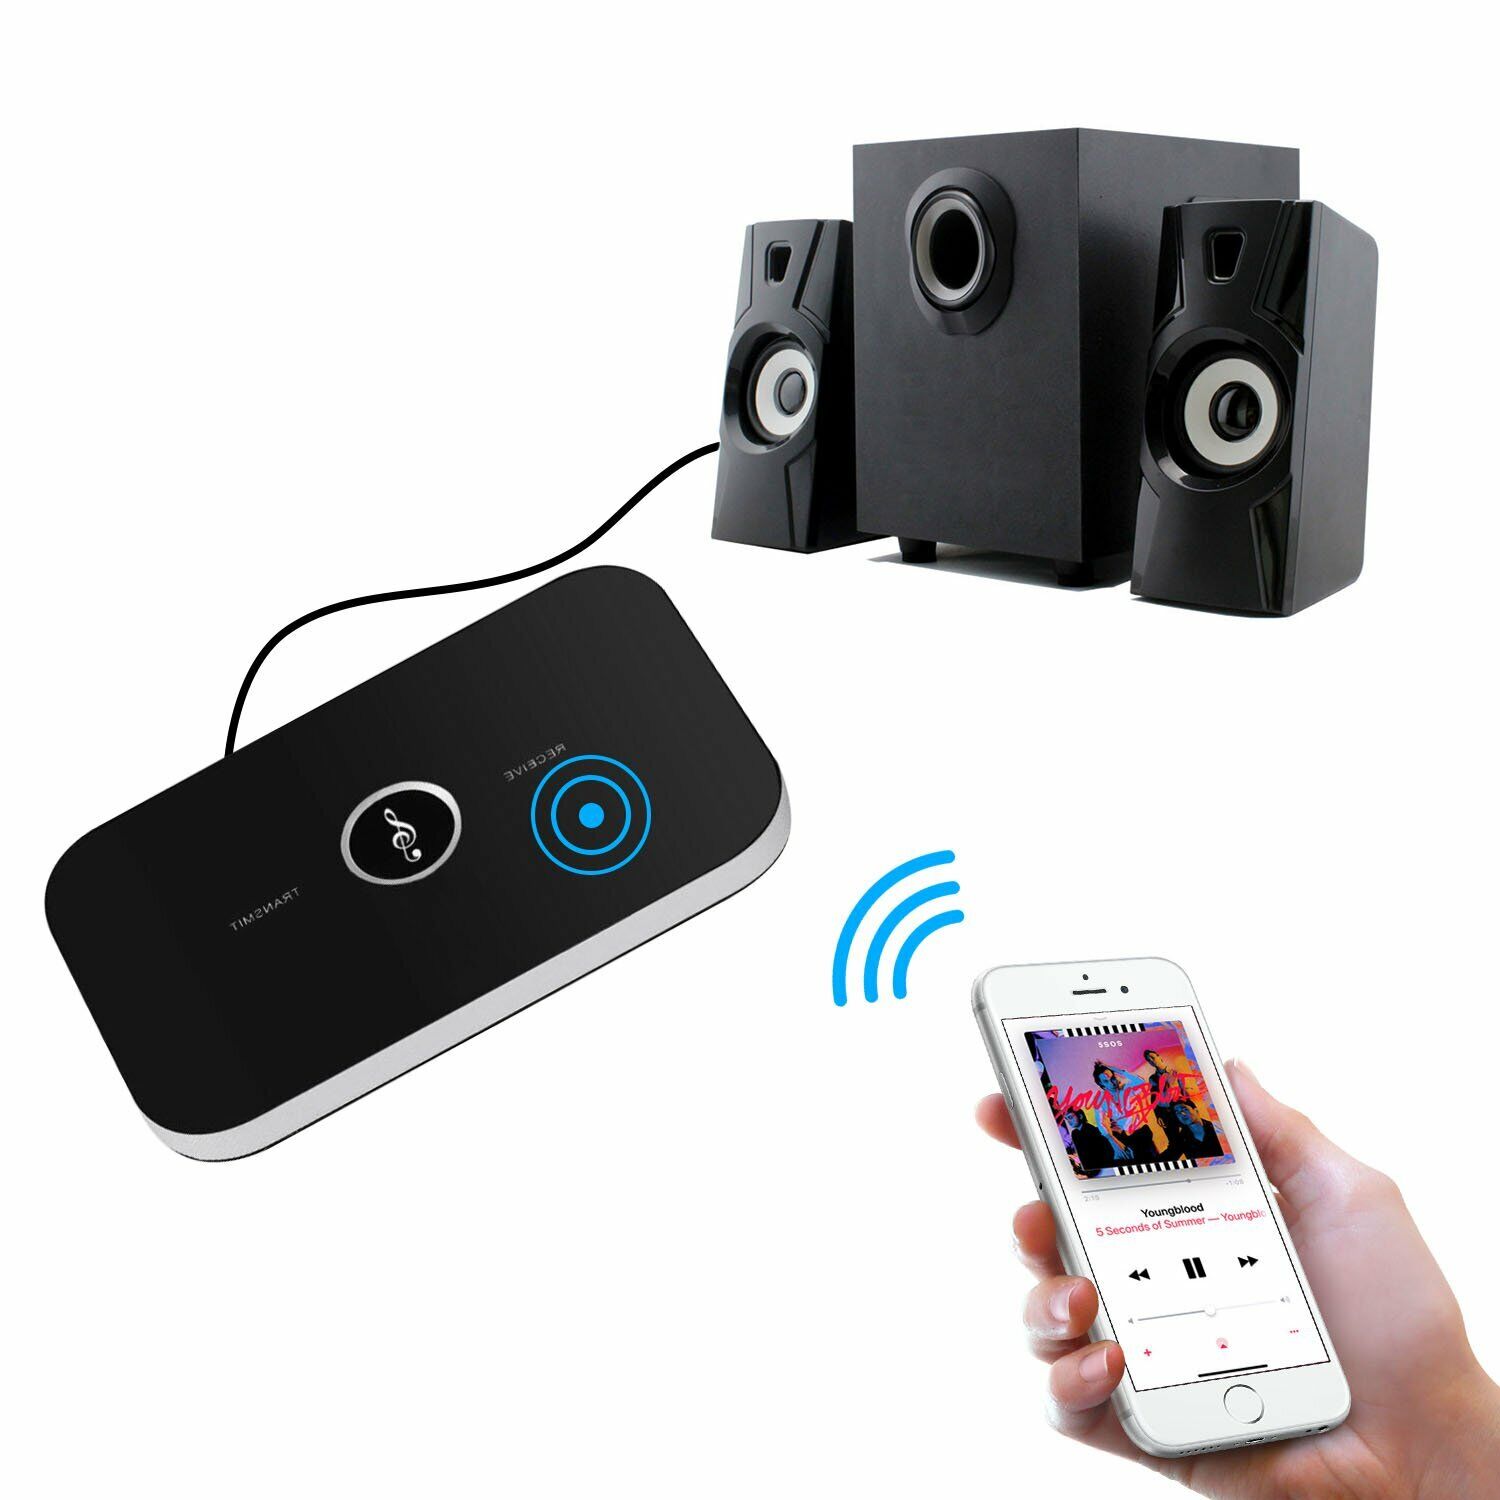 Bluetooth Transmitter & Receiver Wireless Adapter For Home stereos/speakers